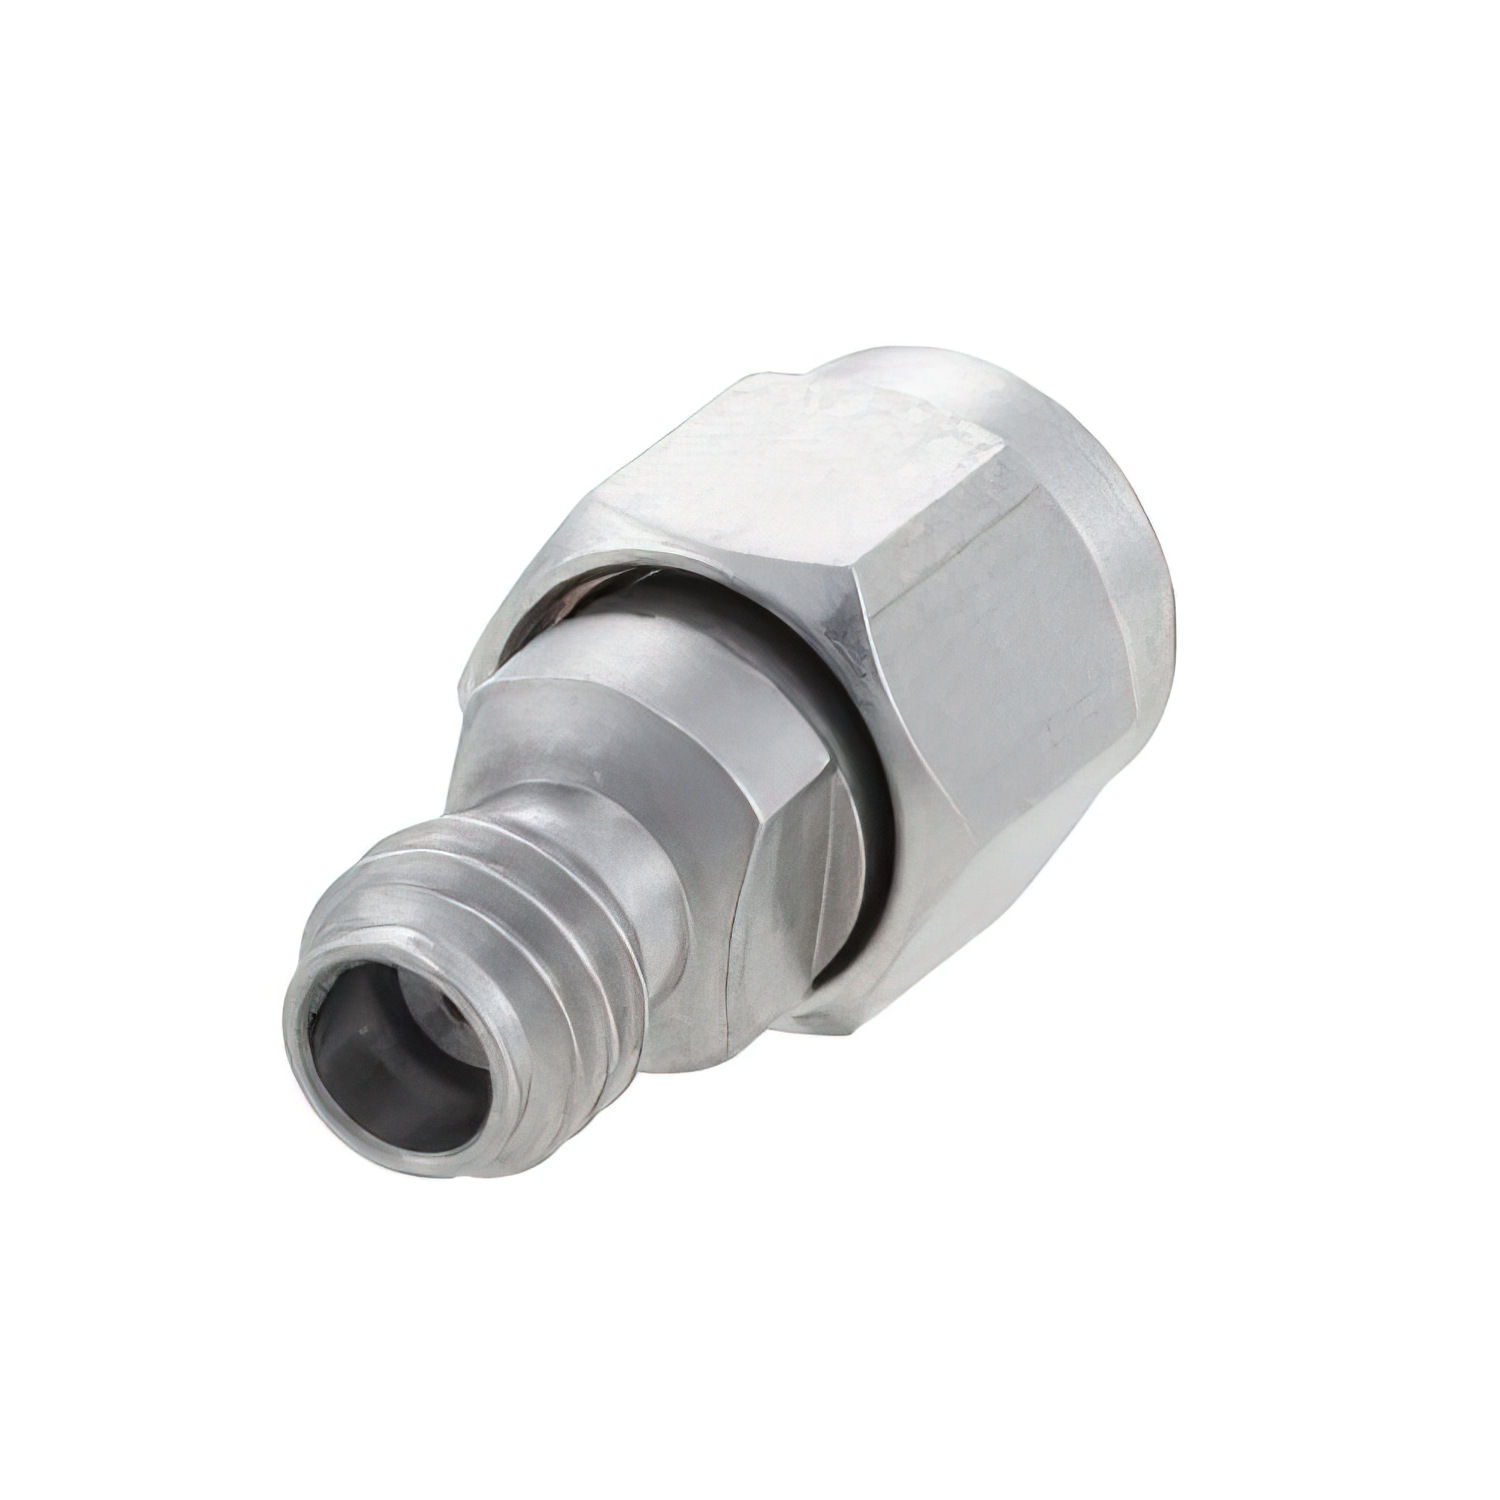 1.0mm Female to 1.0mm Male Adapter1